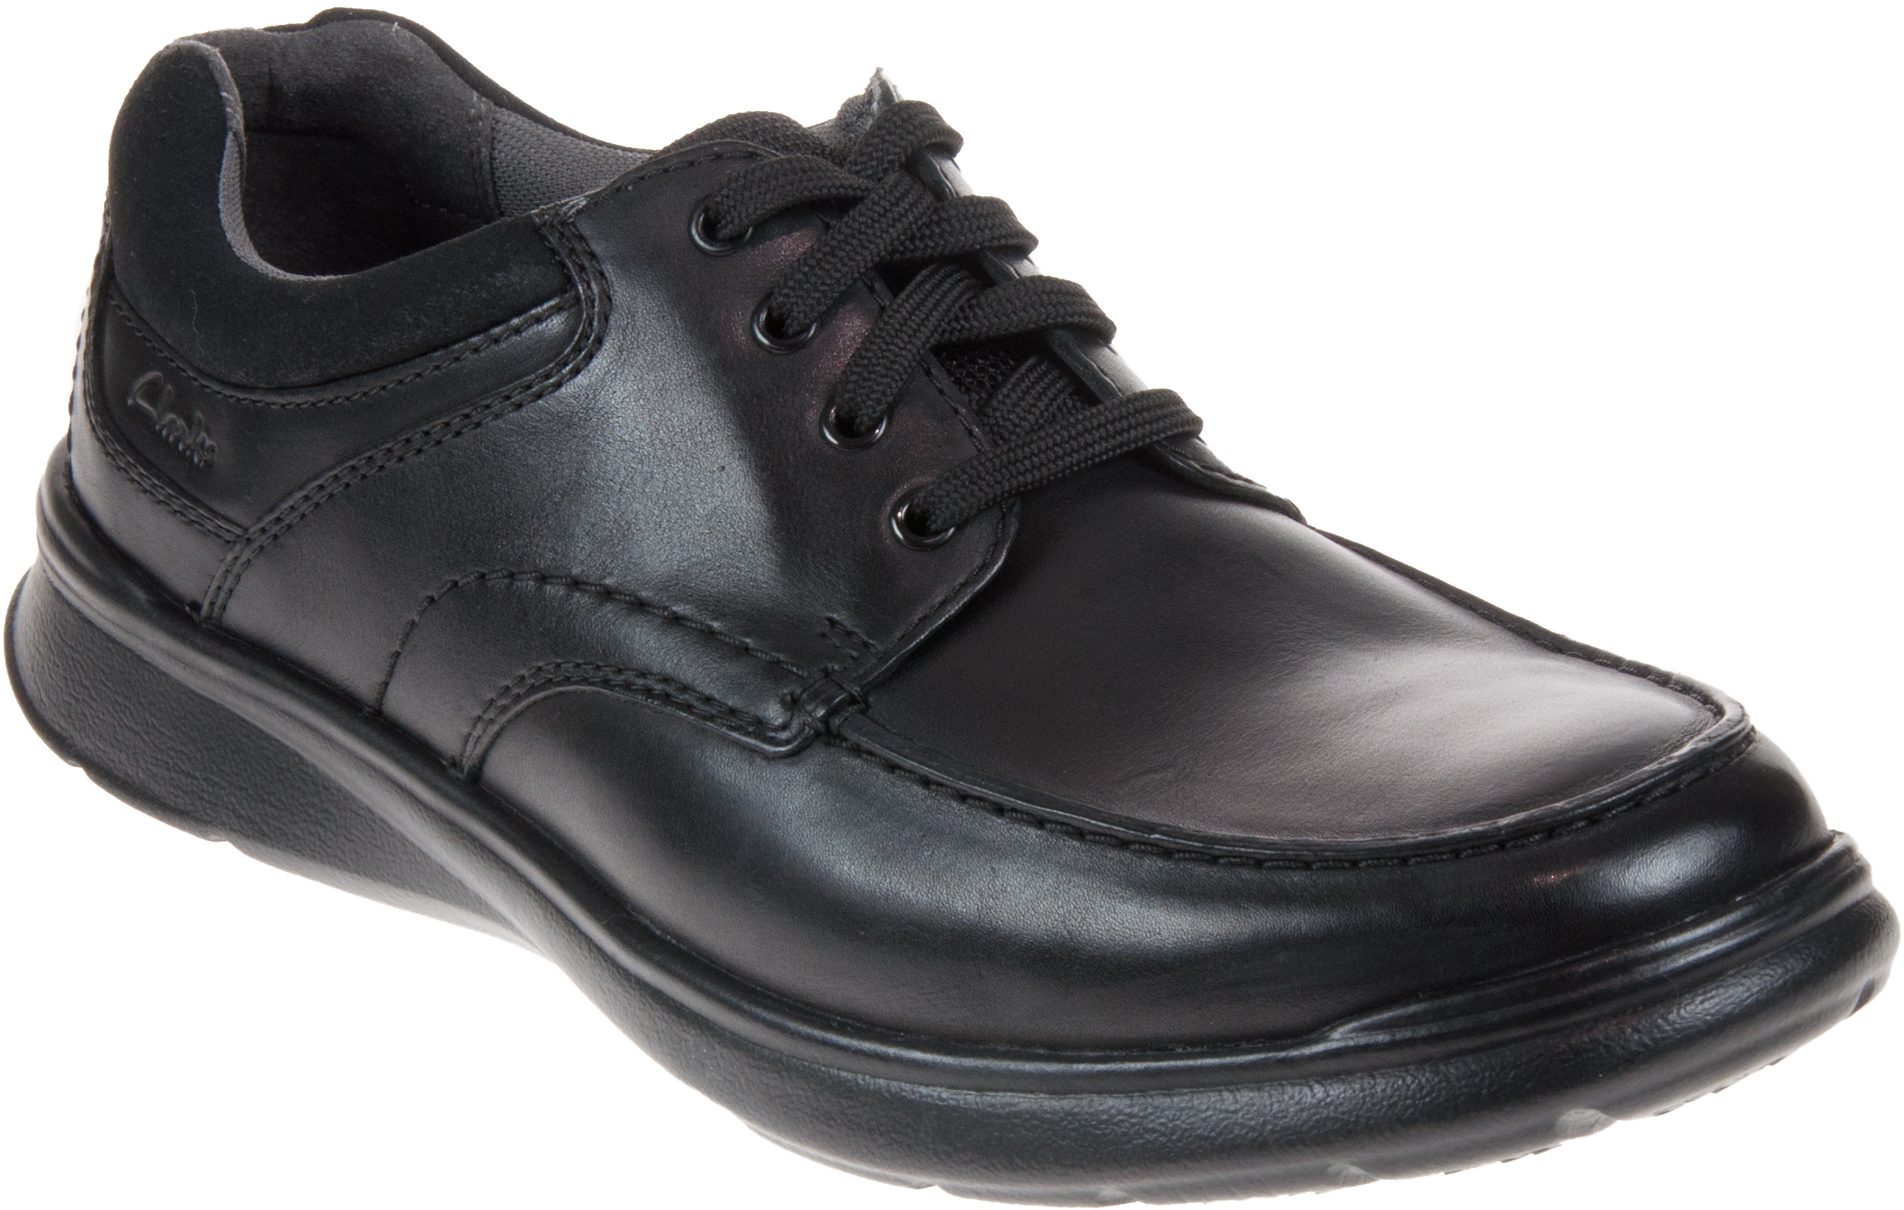 Clarks Cotrell Edge Black Smooth Leather 26137385 - Formal Shoes ...